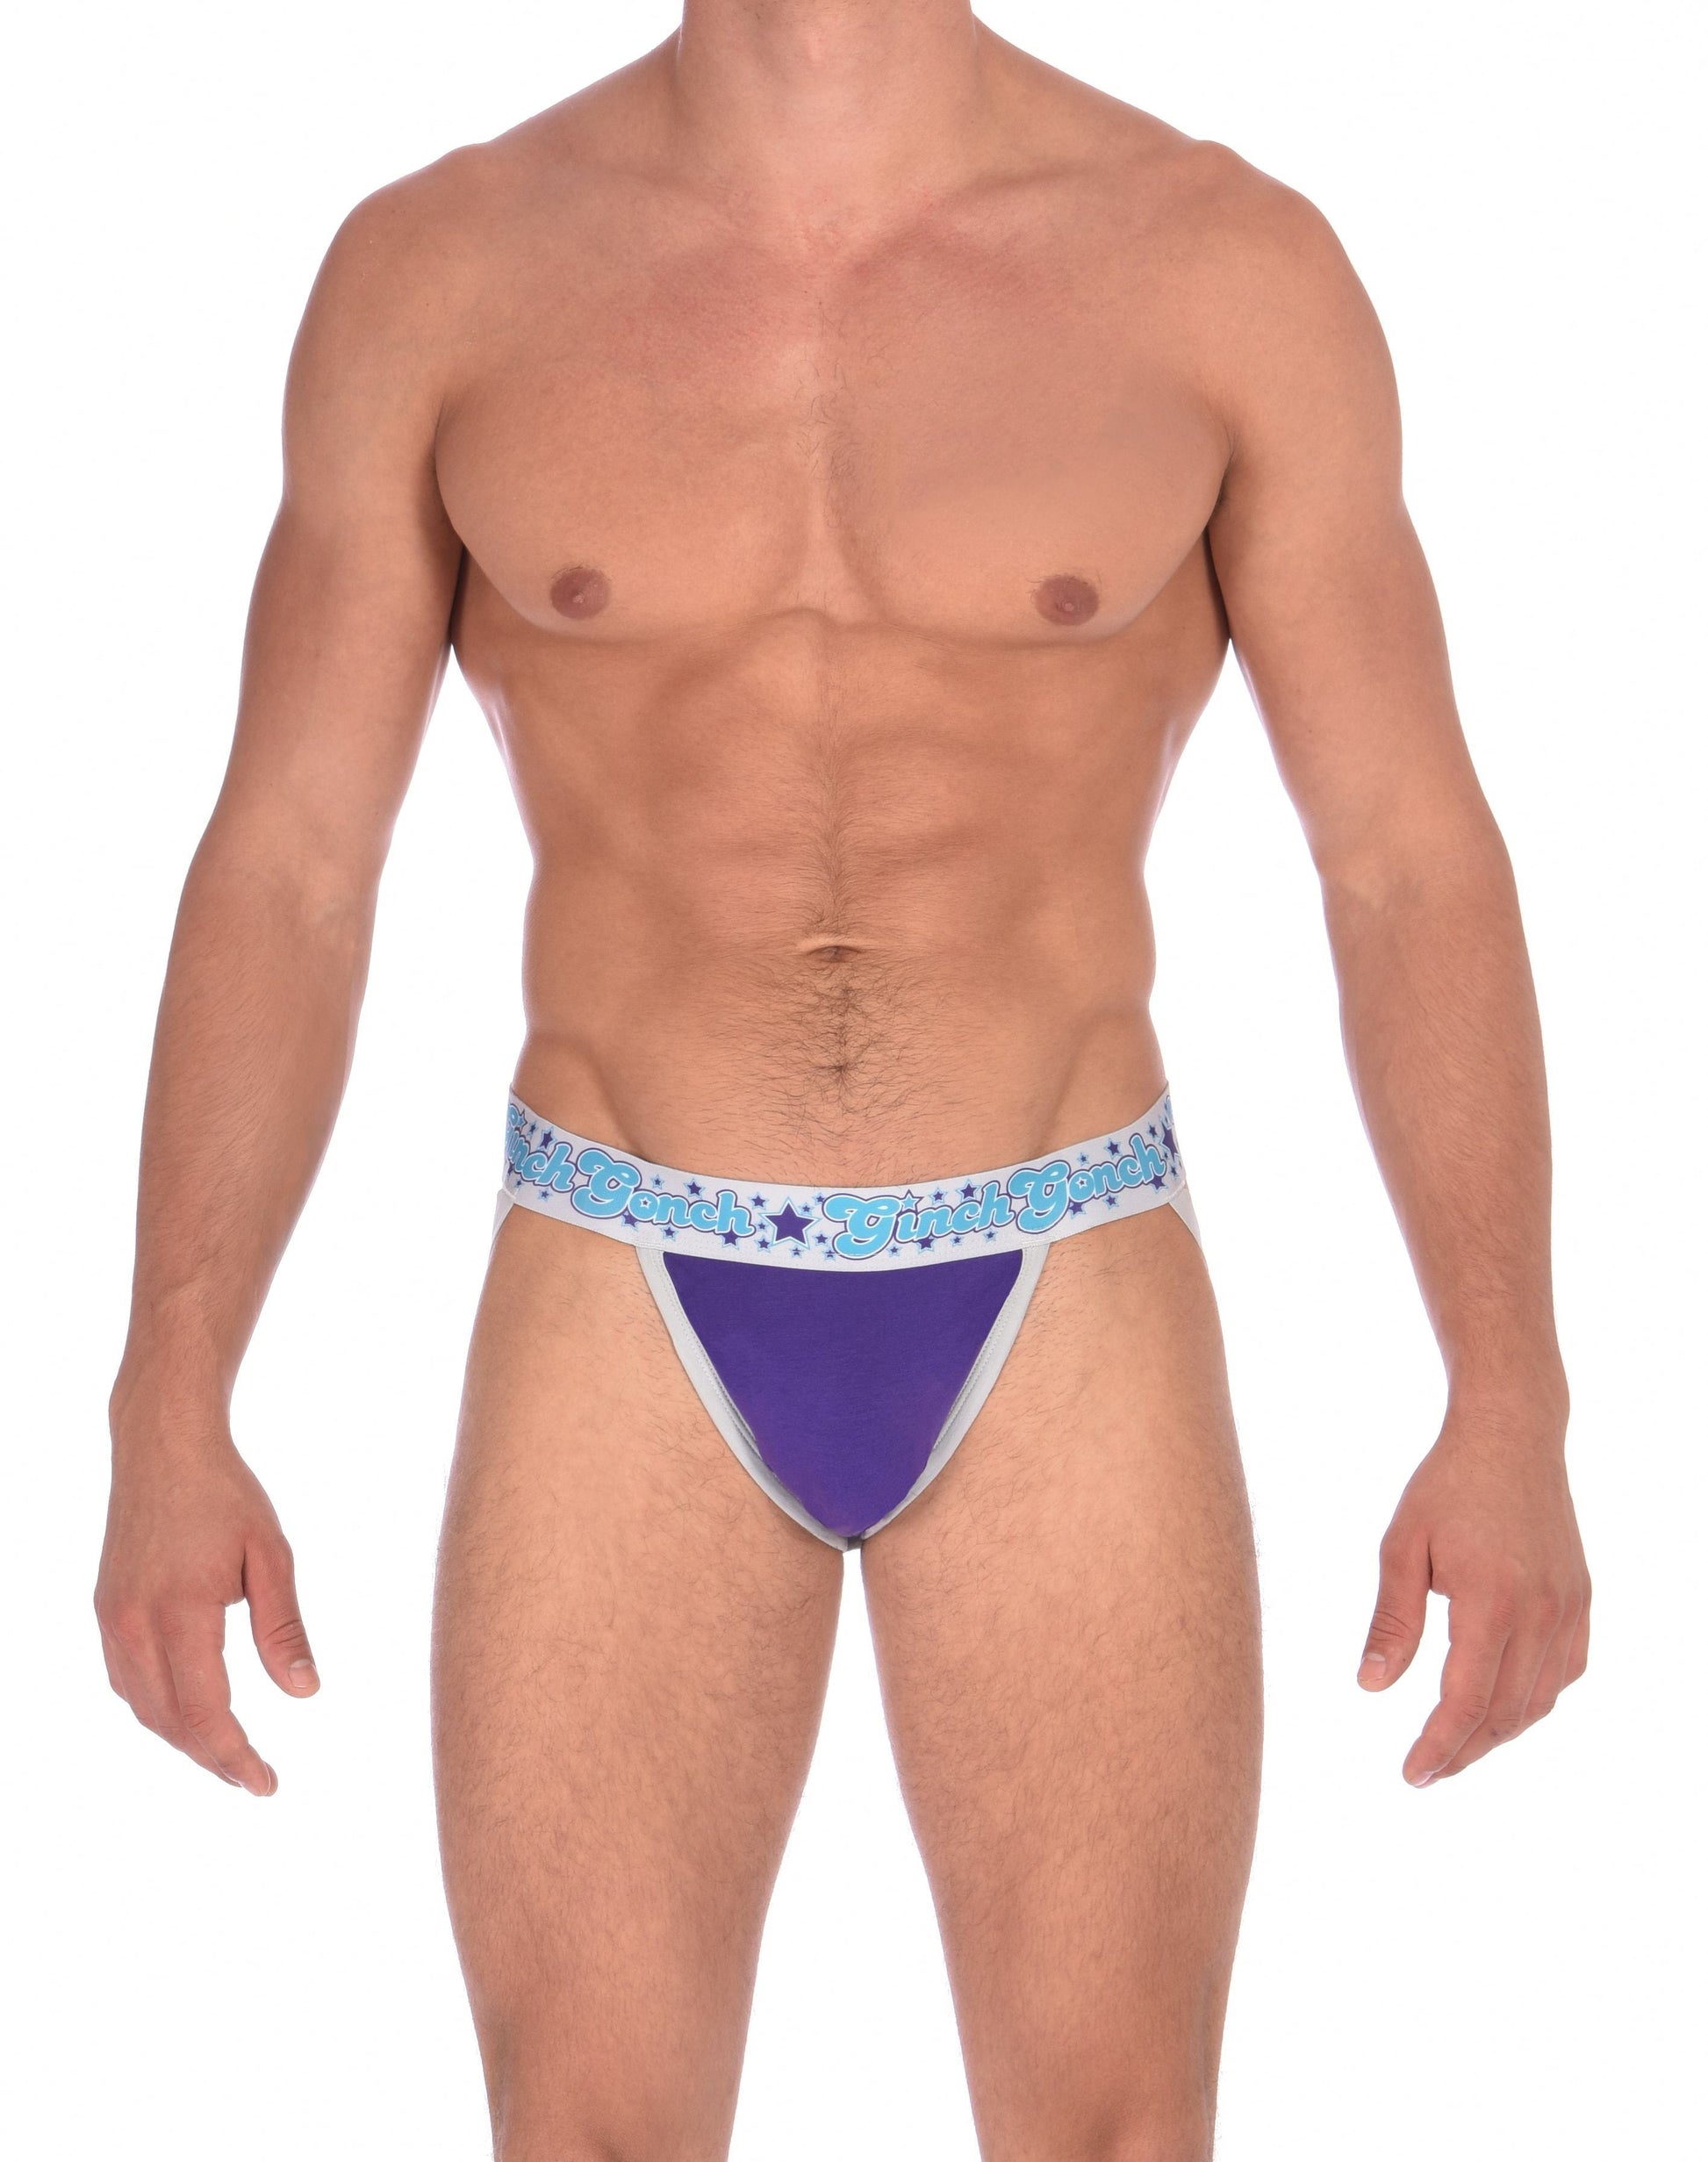 GG Ginch Gonch Purple Haze Jock Strap - men's Underwear purple front panel with grey trim and silver printed waistband front 